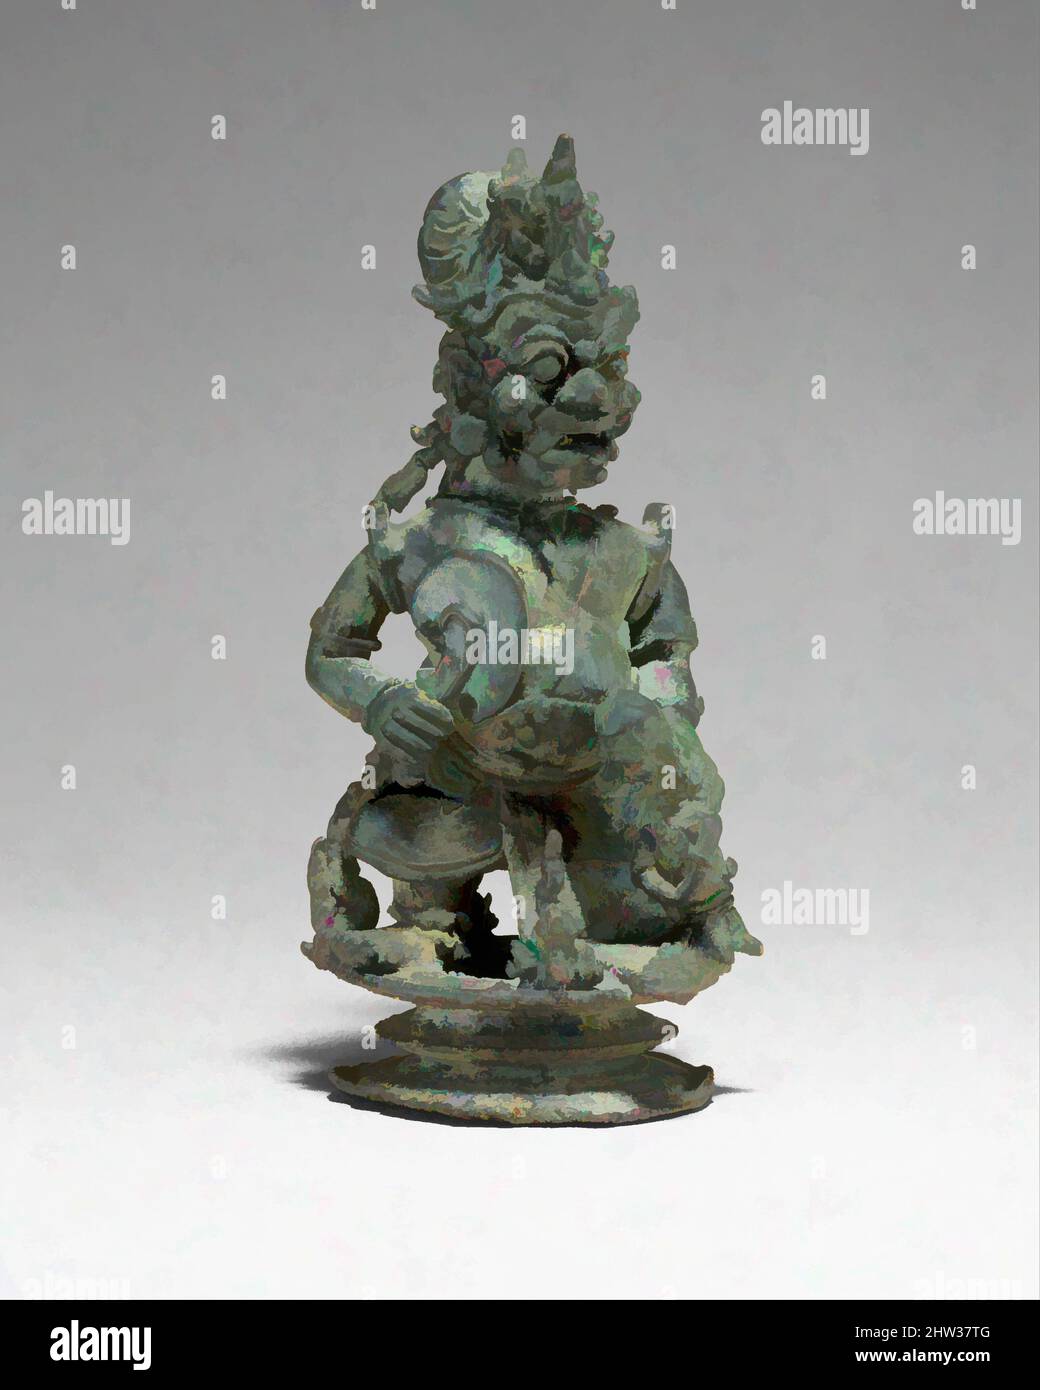 Art inspired by Top of a Bell in the Form of a Demon King or Guardian, Eastern Javanese period, ca. second half of the 12th–early 13th century, Indonesia (Java), Bronze, H. 4 15/16 in. (12.5 cm), Sculpture, This finial from a hanging bell takes the form of an unusually lively and, Classic works modernized by Artotop with a splash of modernity. Shapes, color and value, eye-catching visual impact on art. Emotions through freedom of artworks in a contemporary way. A timeless message pursuing a wildly creative new direction. Artists turning to the digital medium and creating the Artotop NFT Stock Photo